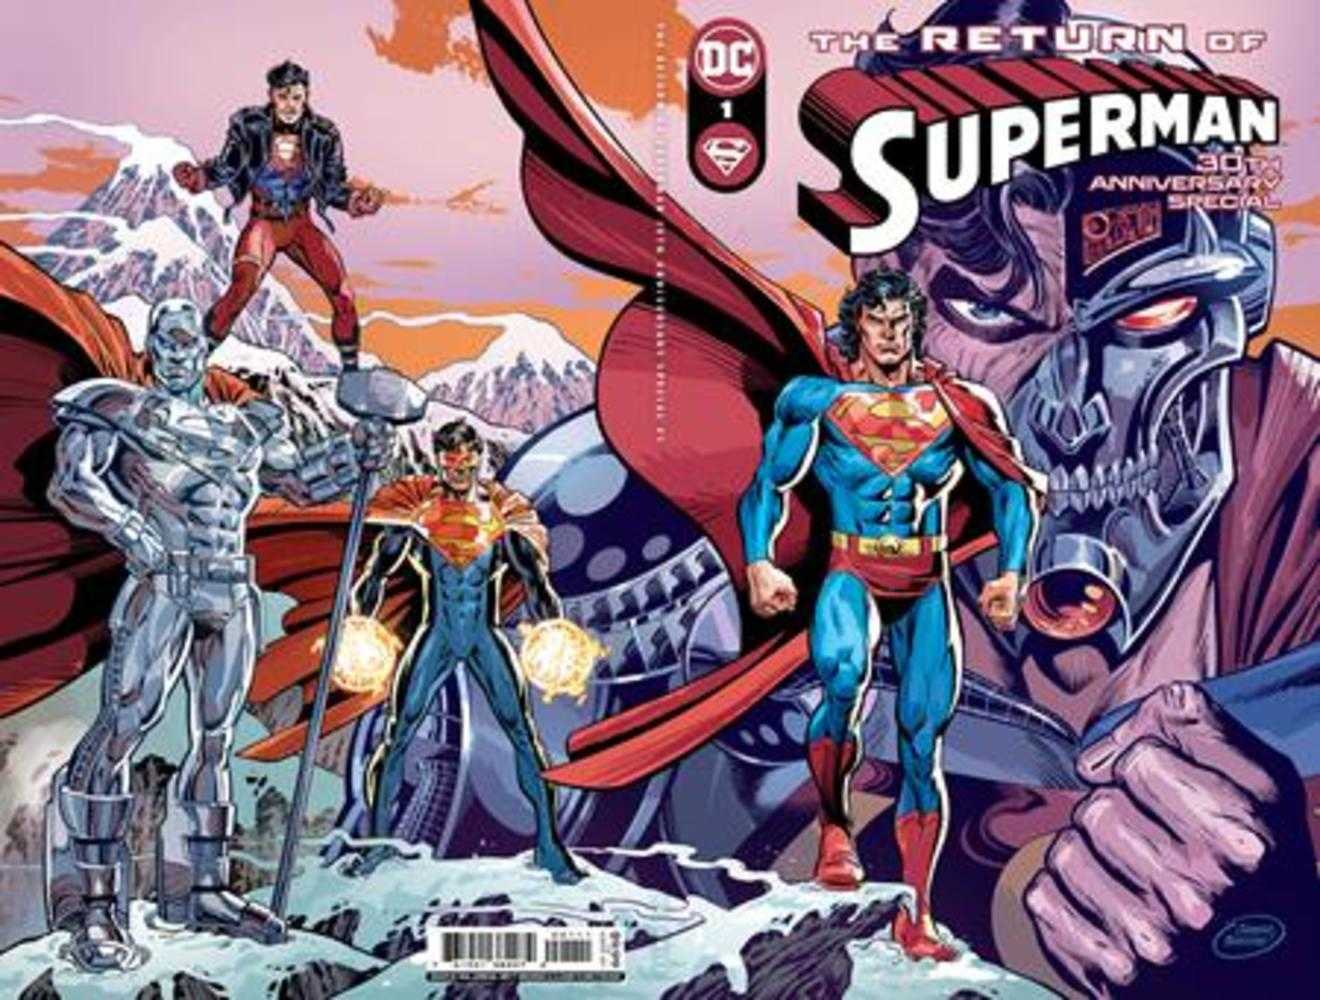 Return Of Superman 30th Anniversary Special #1 (One Shot) Cover A Dan Jurgens Wraparound | Game Master's Emporium (The New GME)